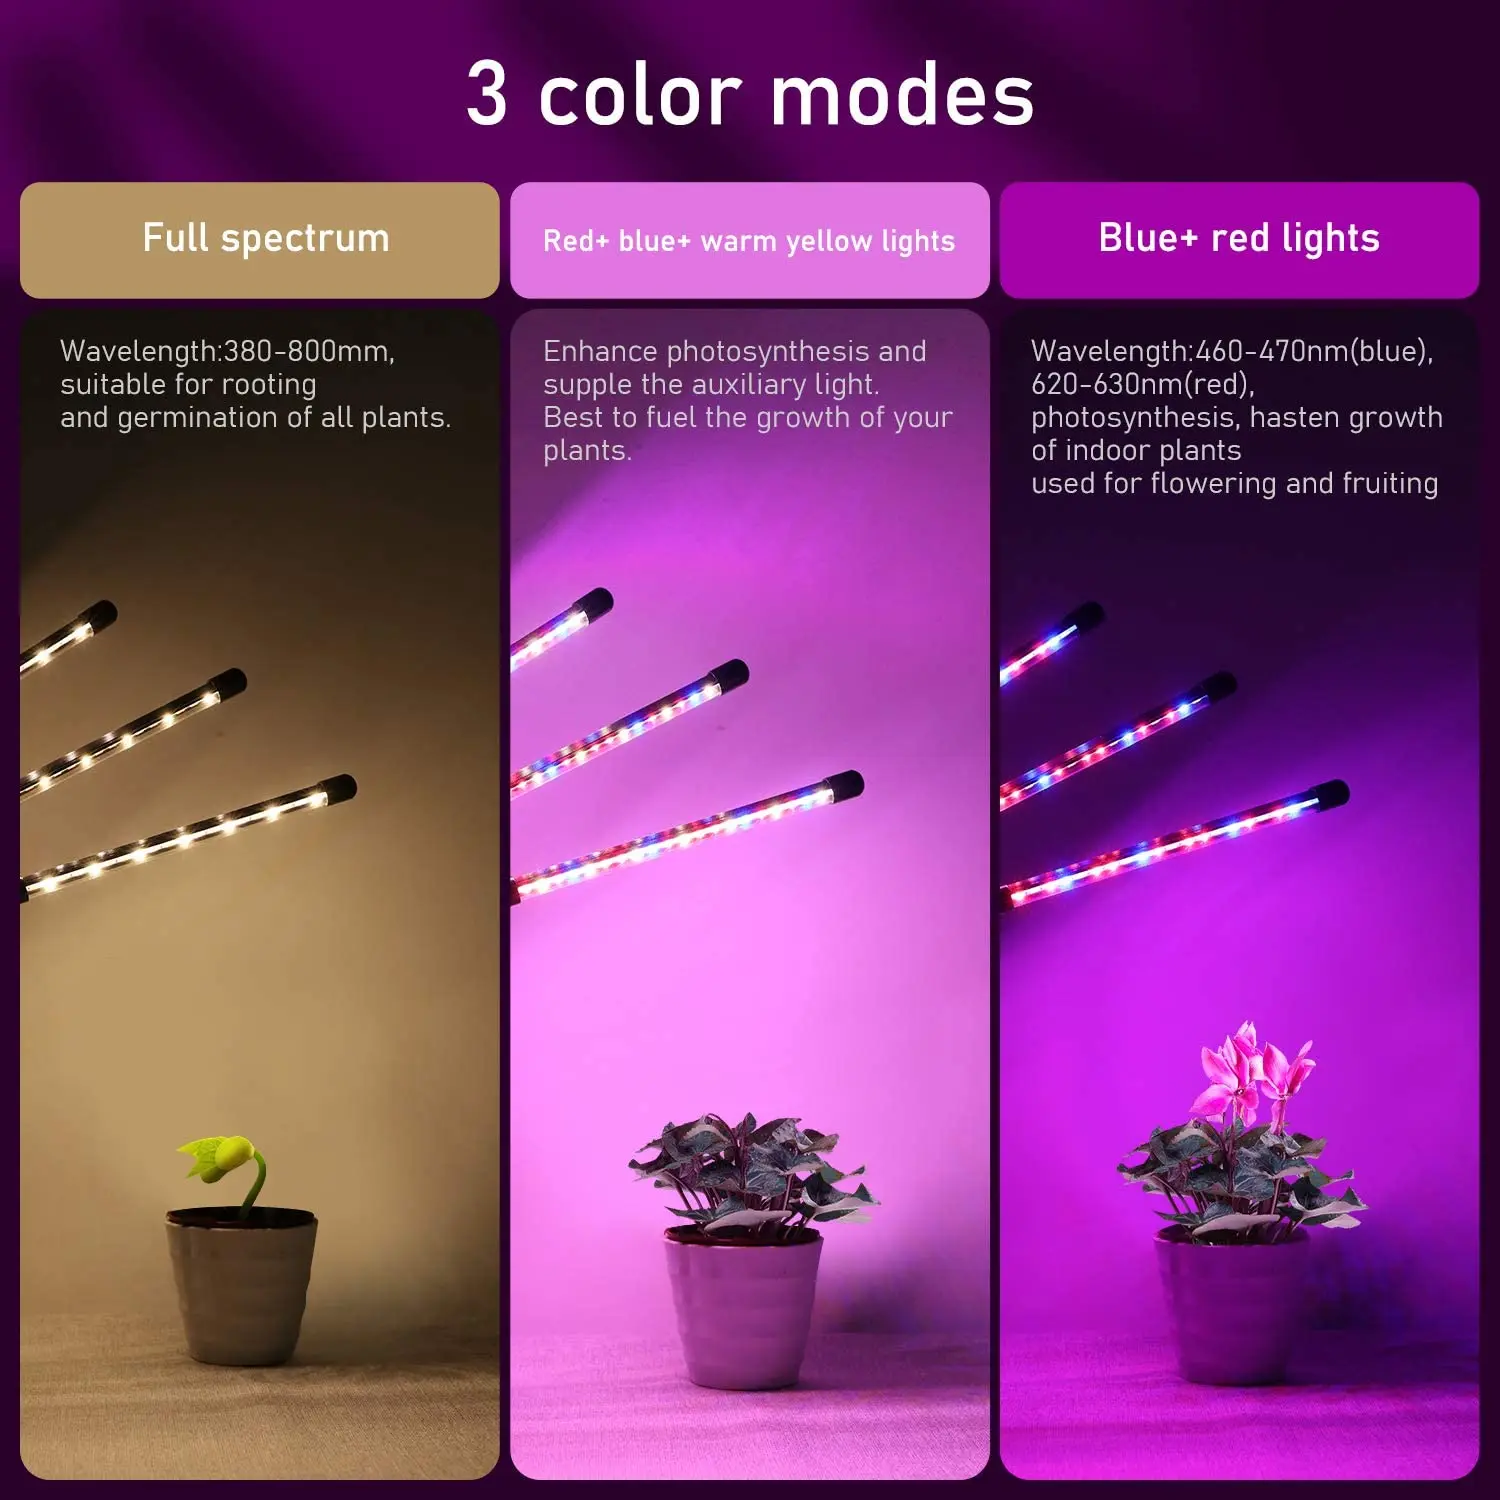 Led Herb Grow Light Bar For Indoor Plants Full Spectrum 4 Head Led Plant Light With Auto 4 8 12h Timer Remote Control Buy Led Lights Grow Grow Light Bar Herb Grow Light Product On